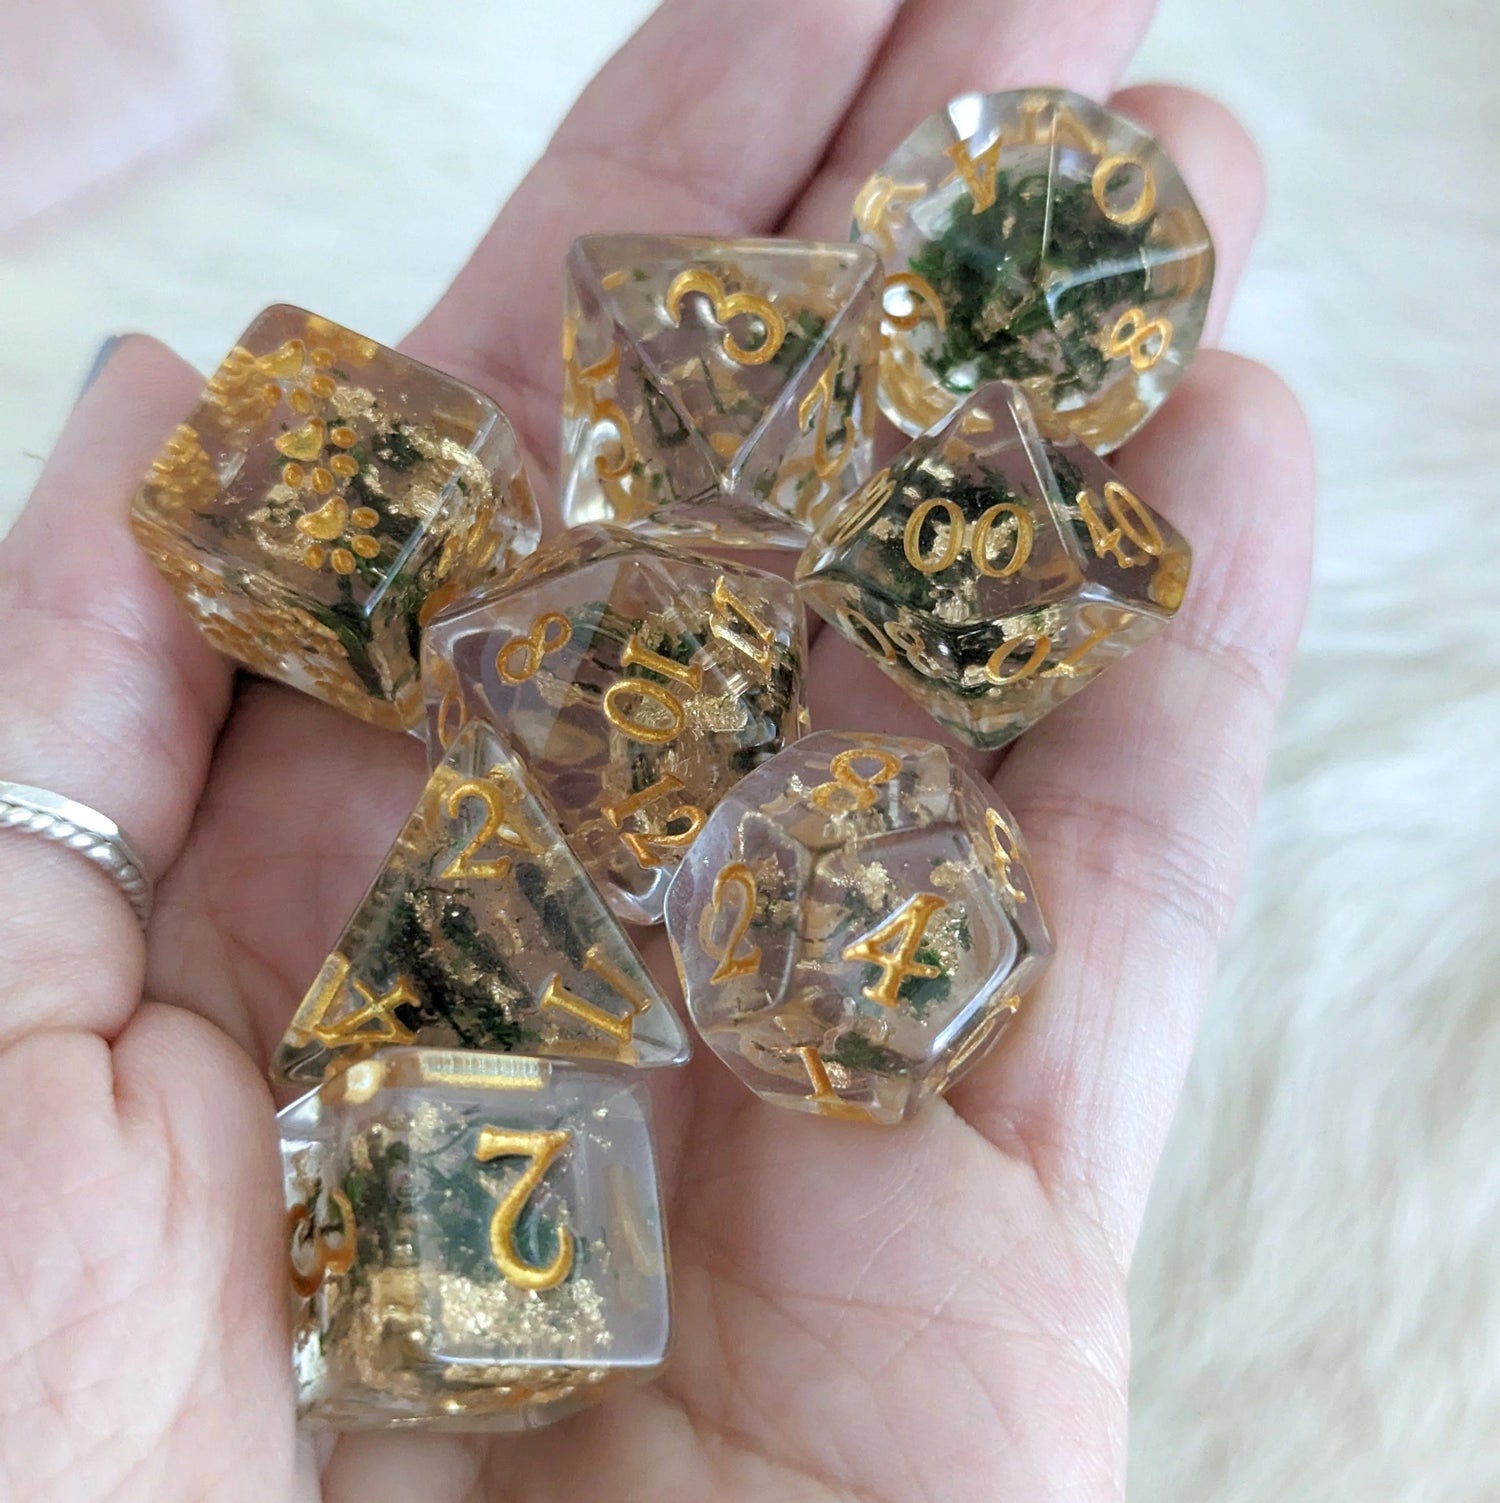 Moss and Gold - 8 Piece Dice Set - The Fourth Place